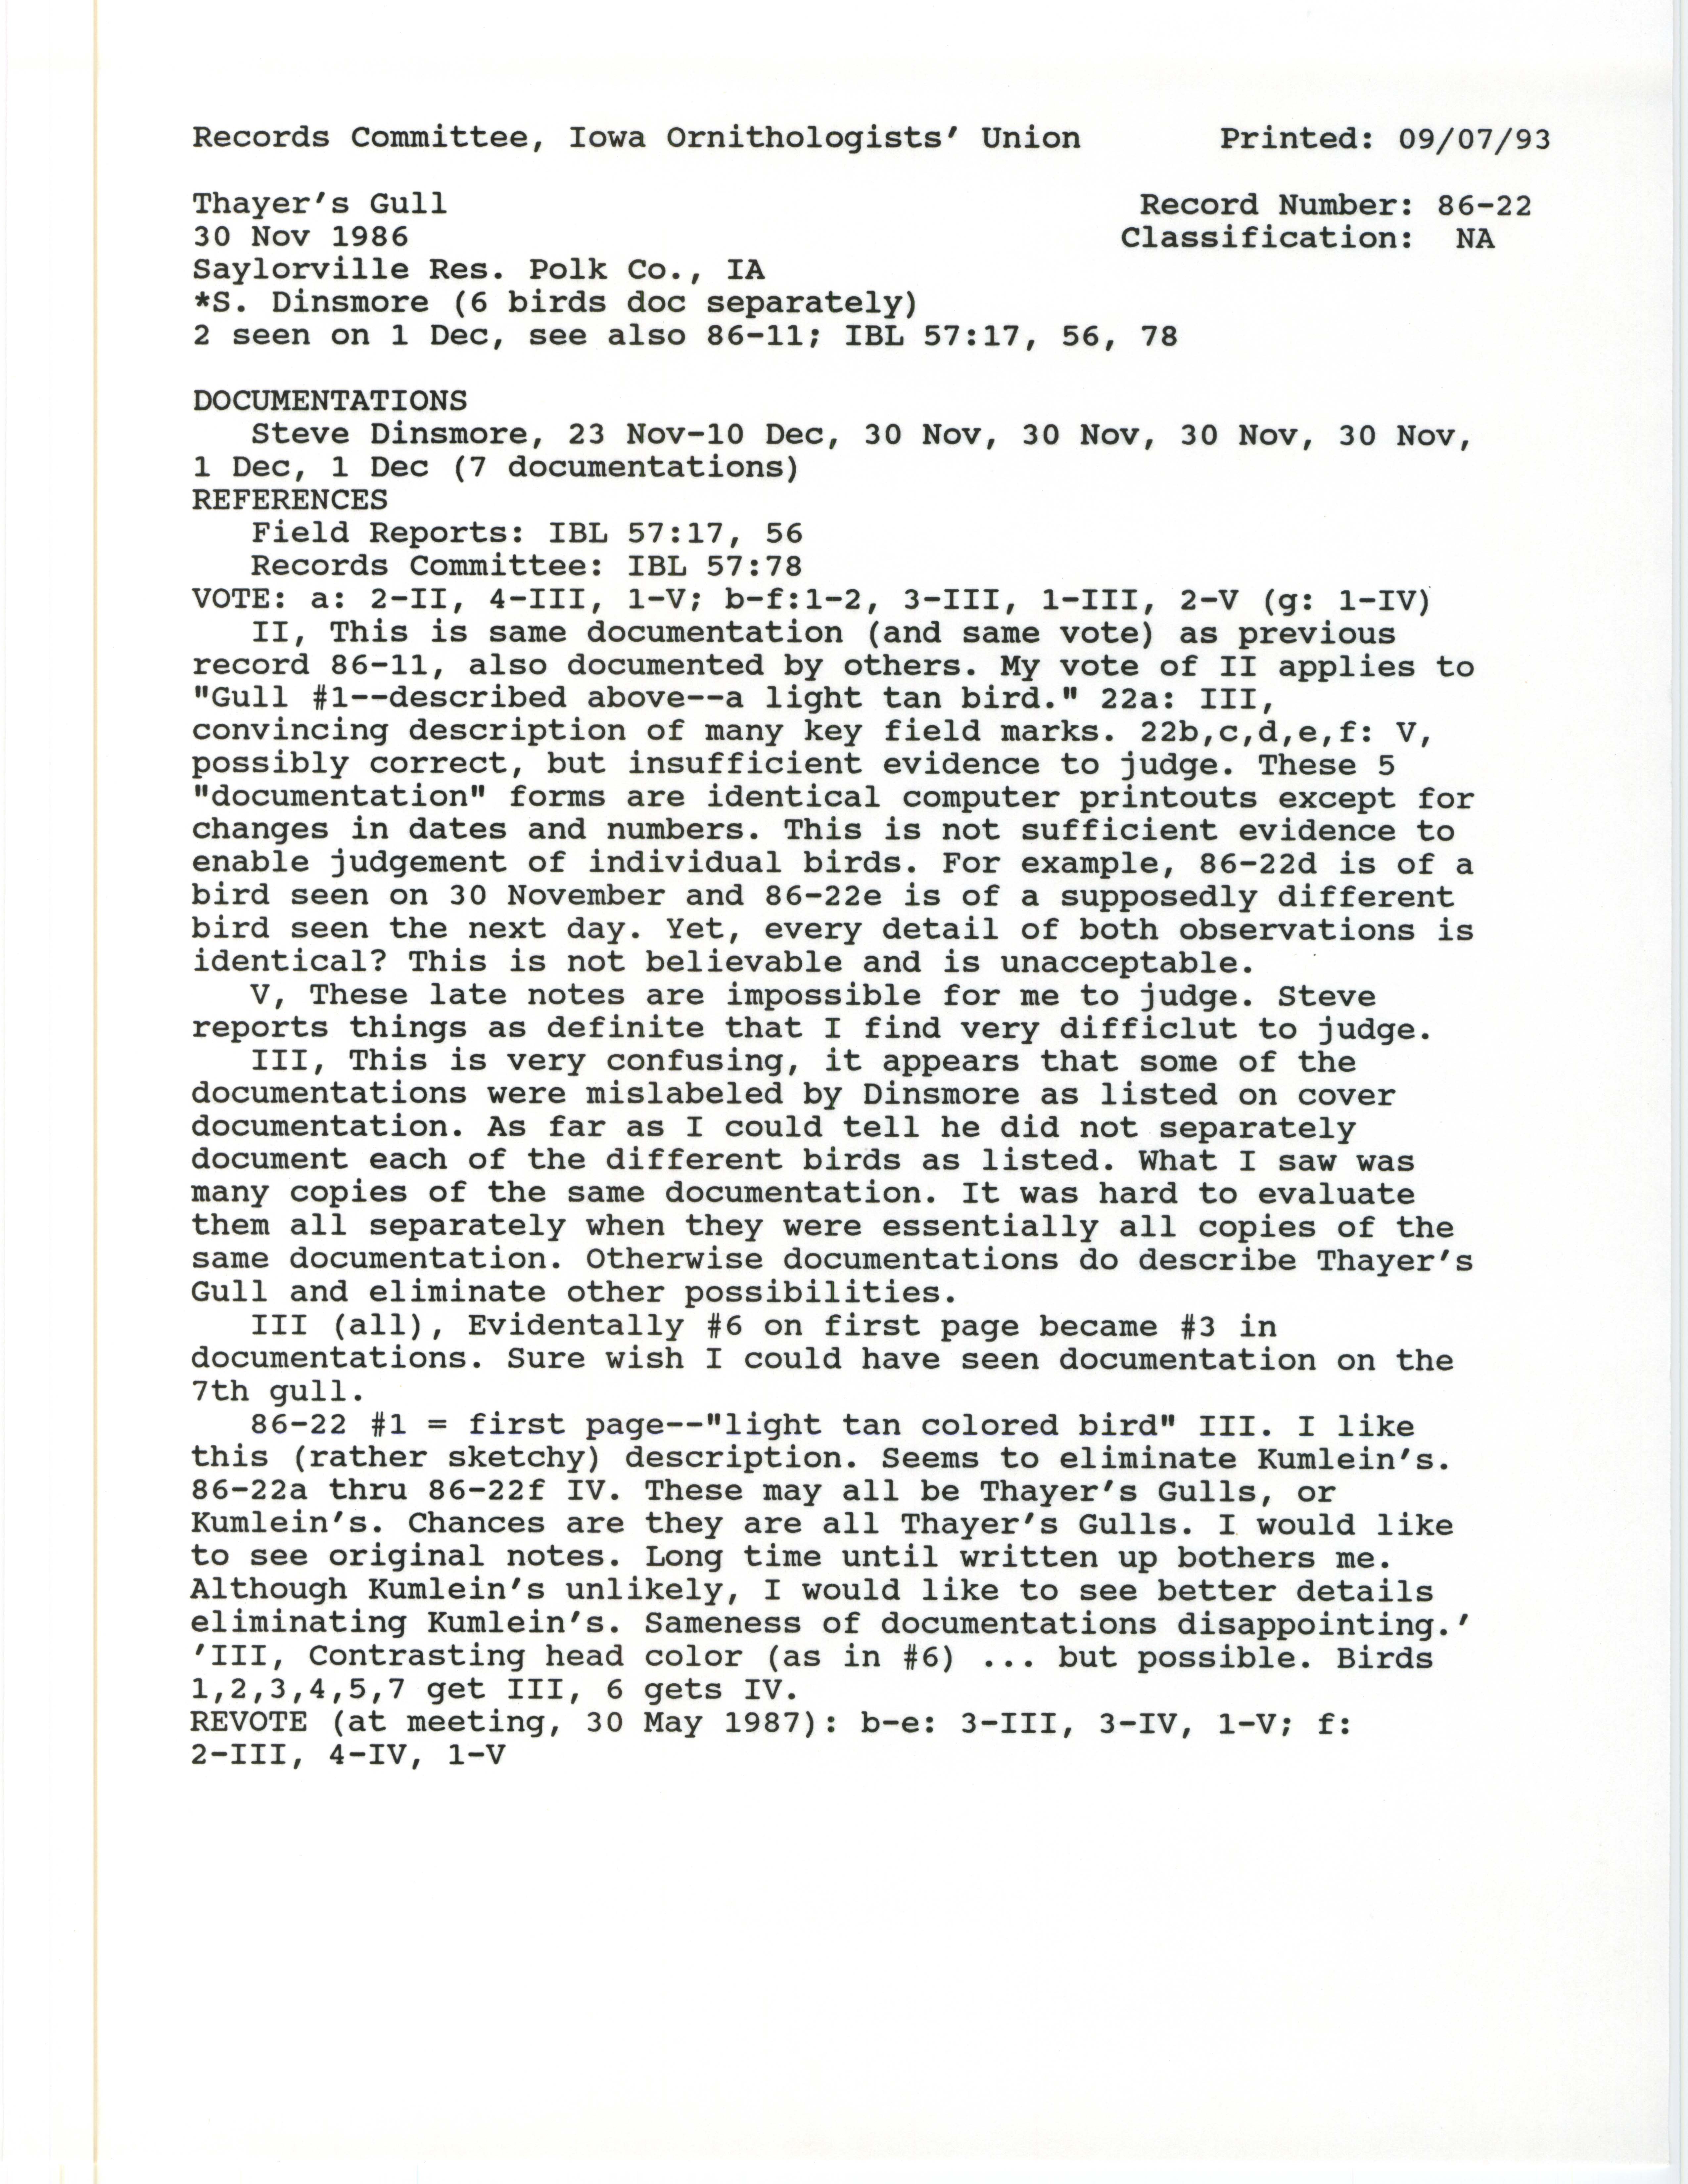 Records Committee review for rare bird sighting of Thayer's Gull near Saylorville Reservoir Dam and Oak Grove Beach, 1986